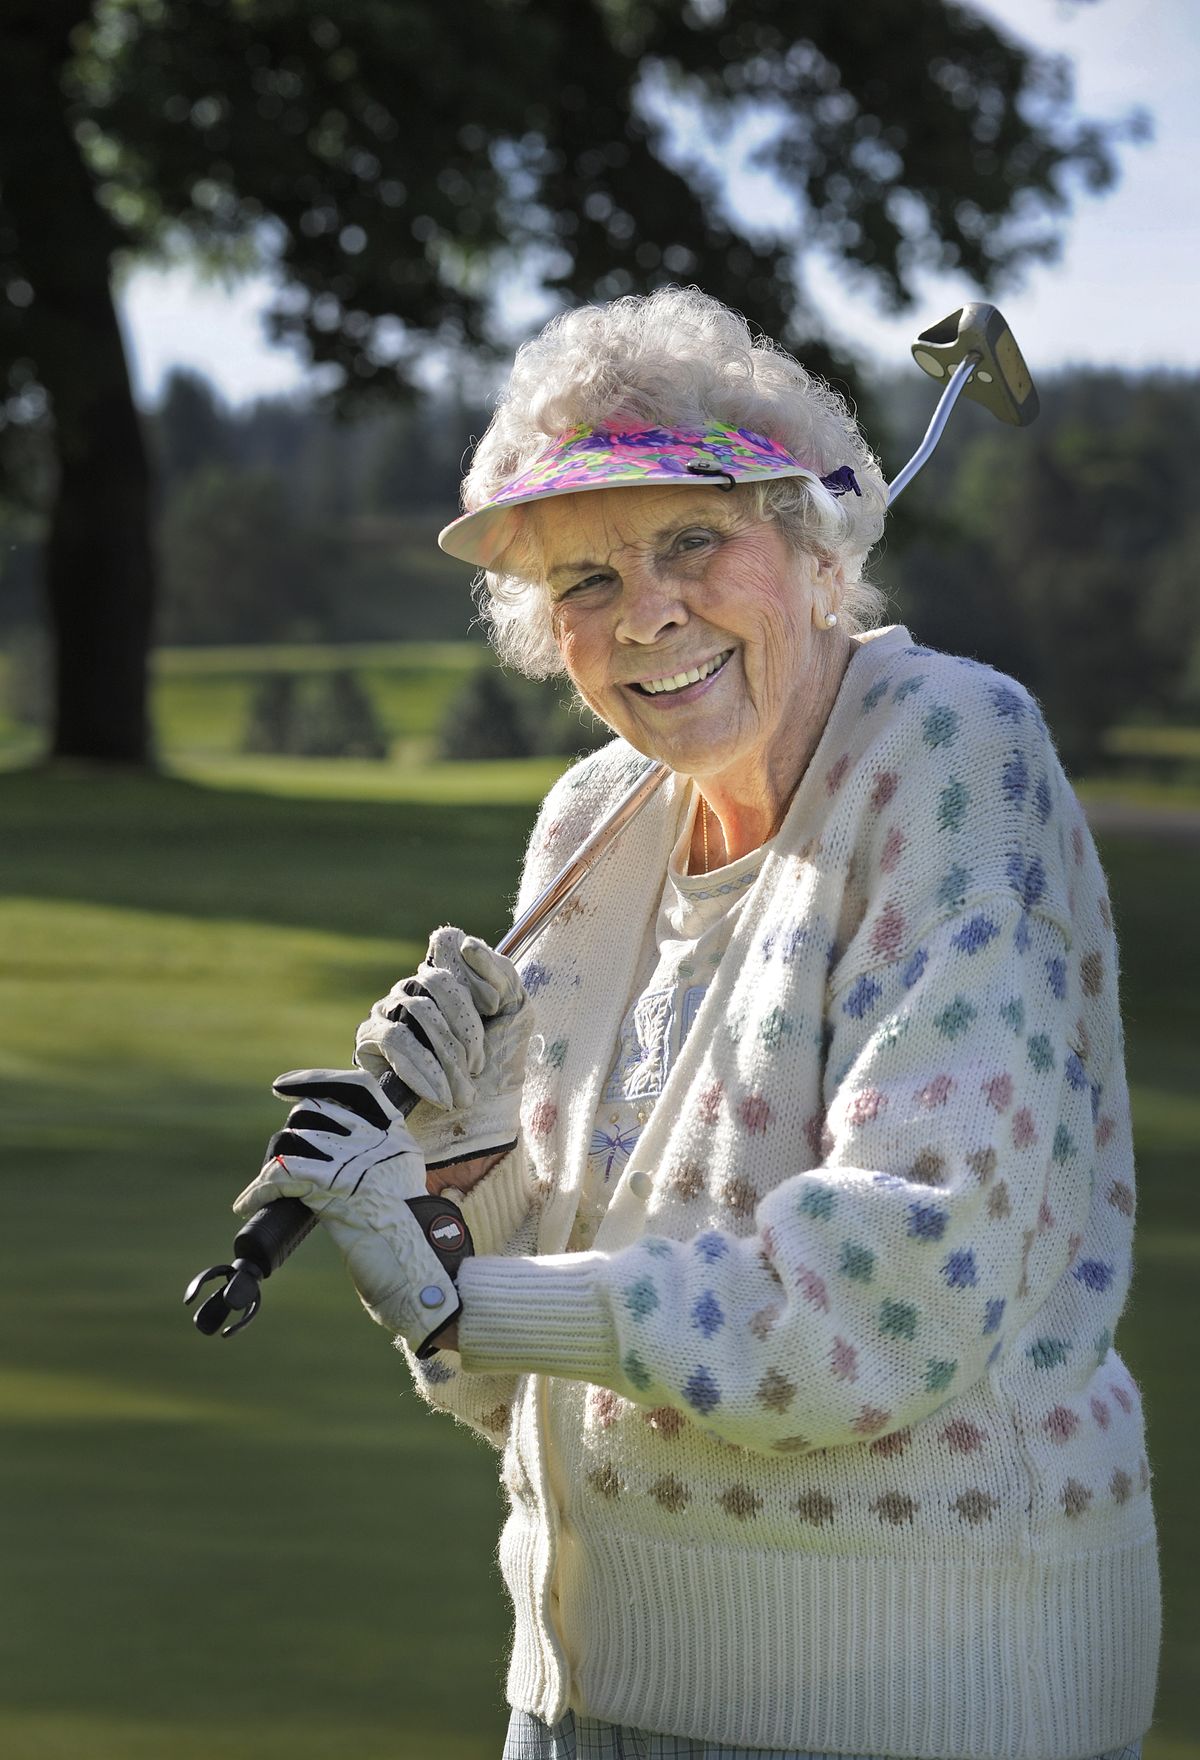 “Your only as old as you feel,” said June Syverson before a round of golf at Hangman Valley Golf Course in Spokane with her friend, Virginia Danke, on June 12, 2019.  (Christopher Anderson/For The Spokesman-Review)